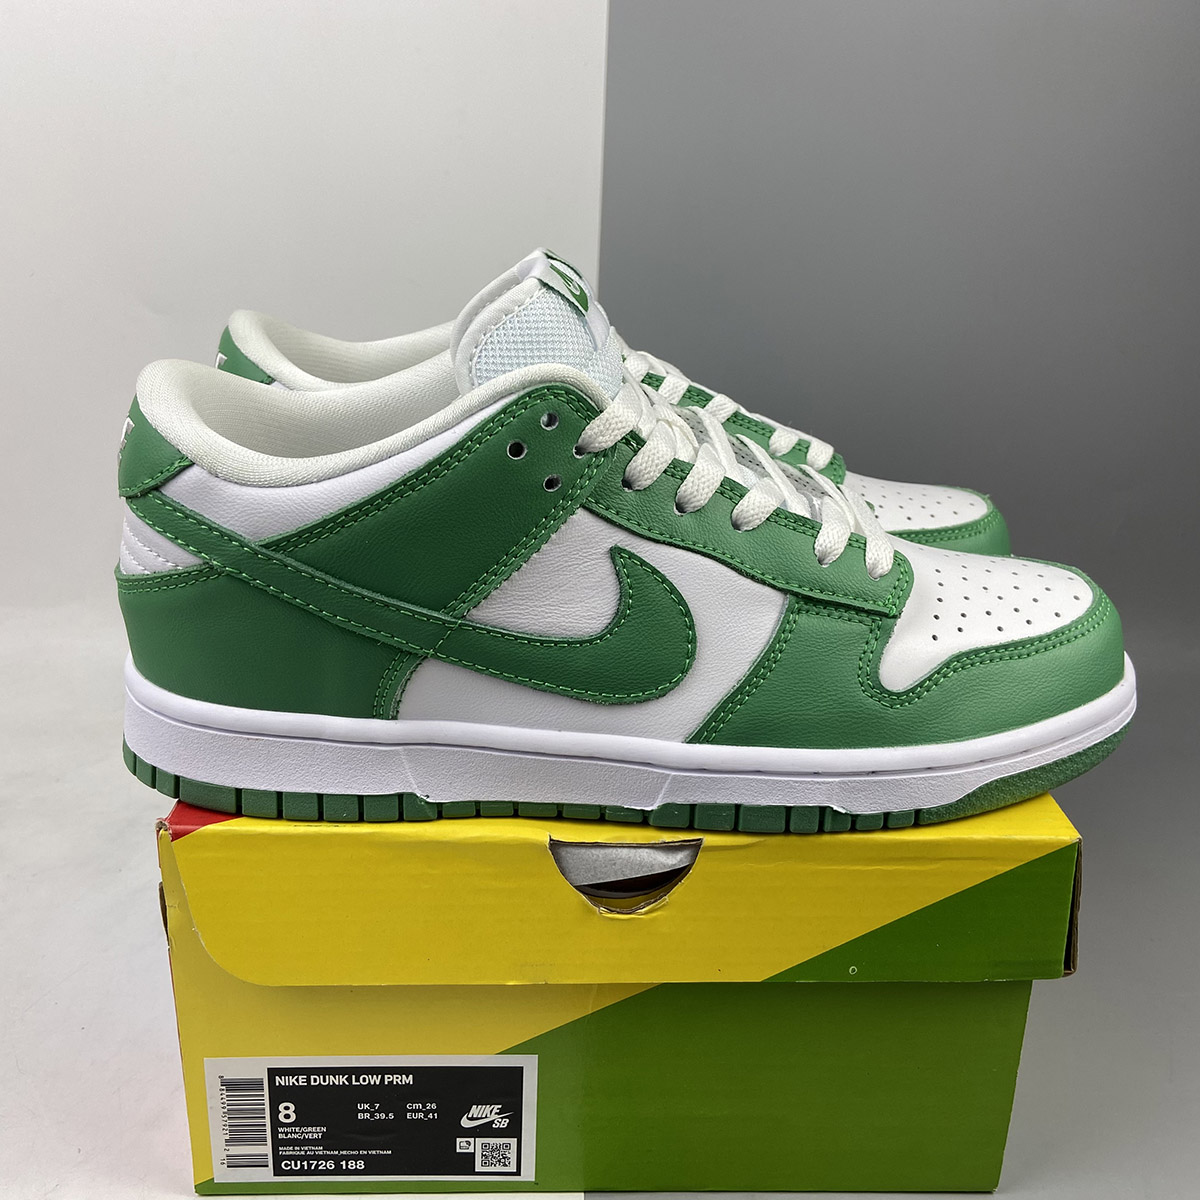 Nike Dunk Low White/Green Glow For Sale – The Sole Line